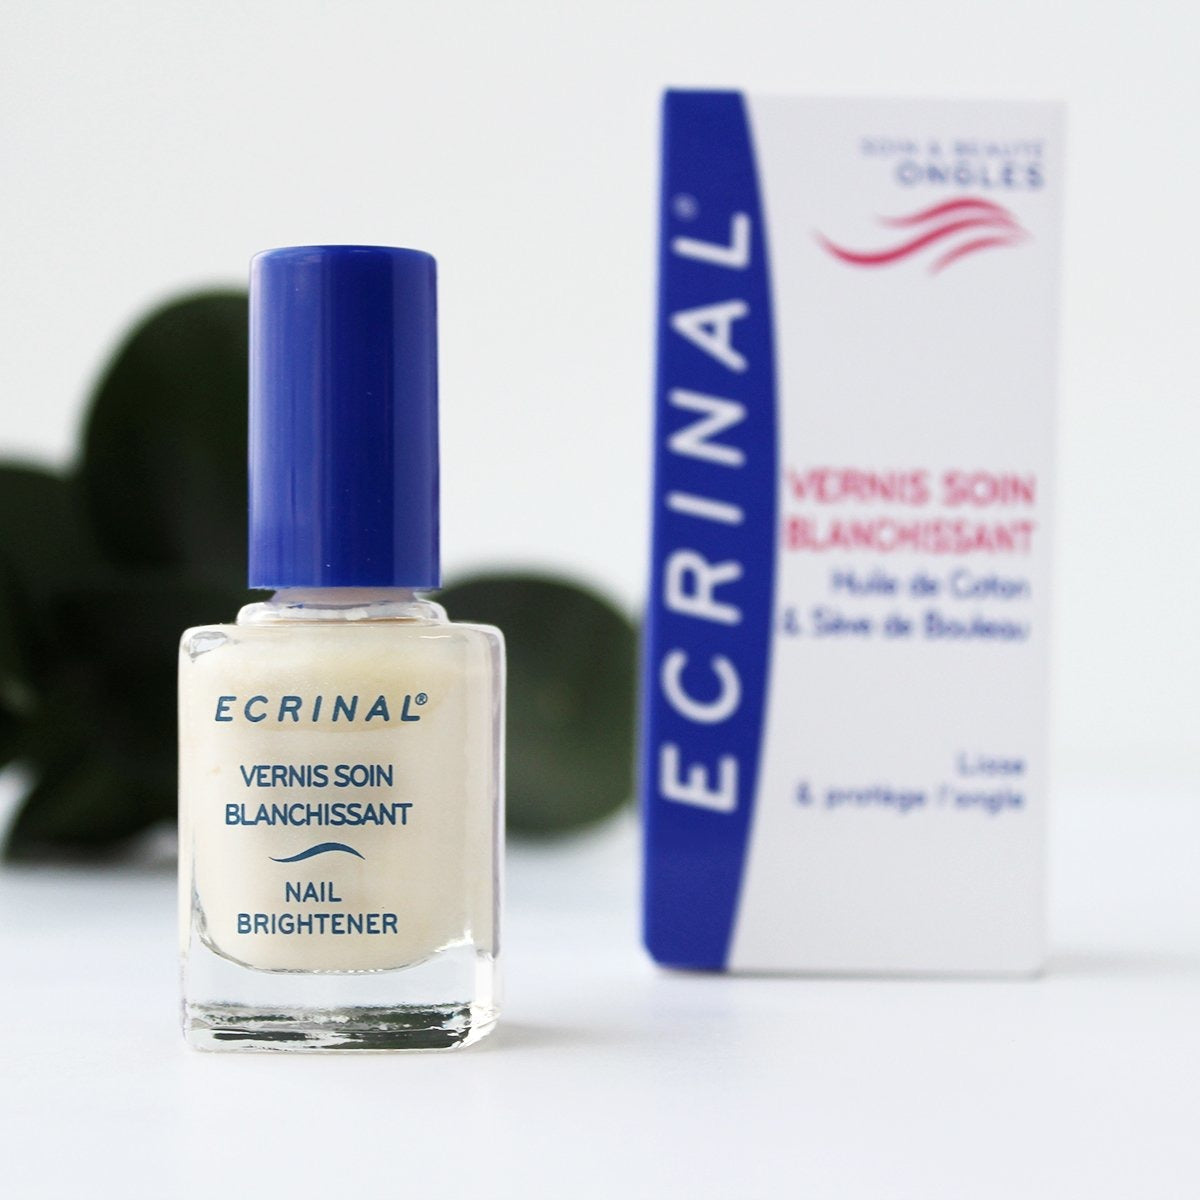 ECRINAL Vernis Soin Blanchissant 10 ml – The Beauty Shoppers